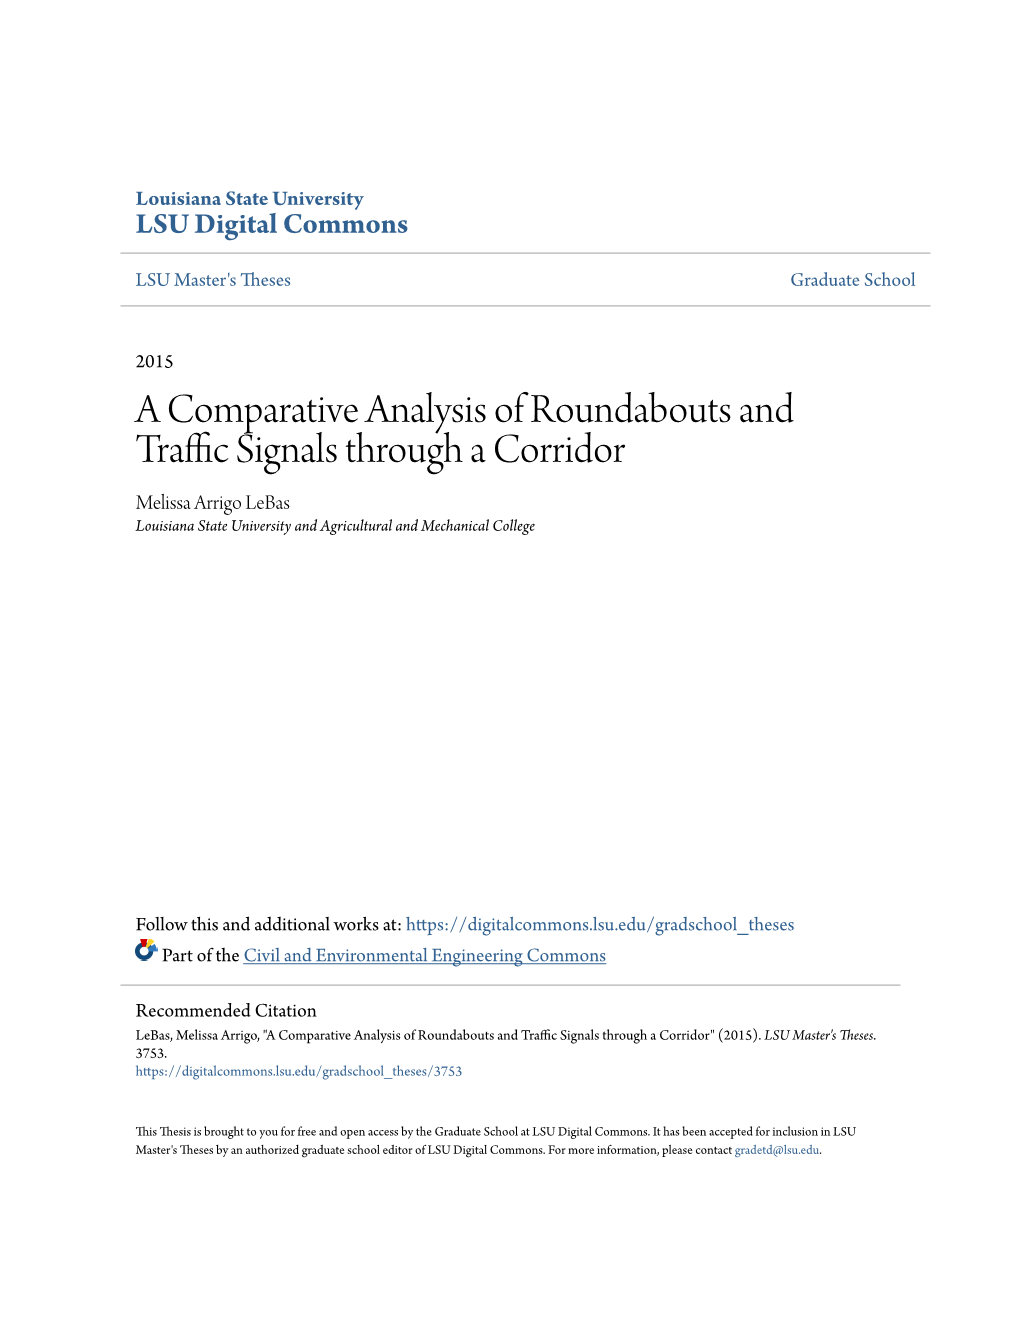 A Comparative Analysis of Roundabouts and Traffic Signals Through a Corridor